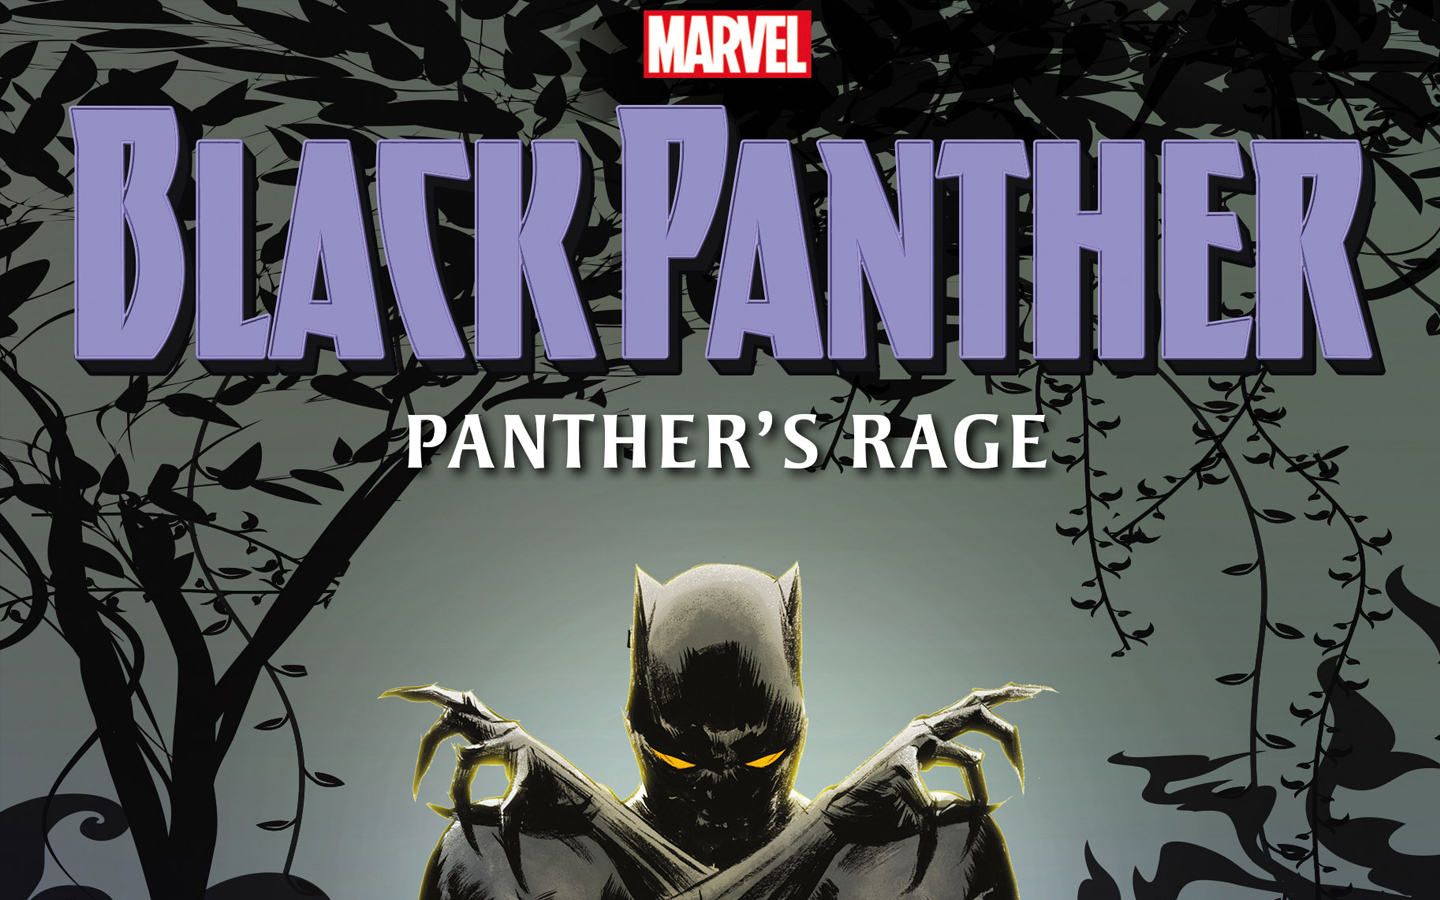 Learn More About ‘Black Panther: Panther’s Rage’ By Sheree Renée Thomas